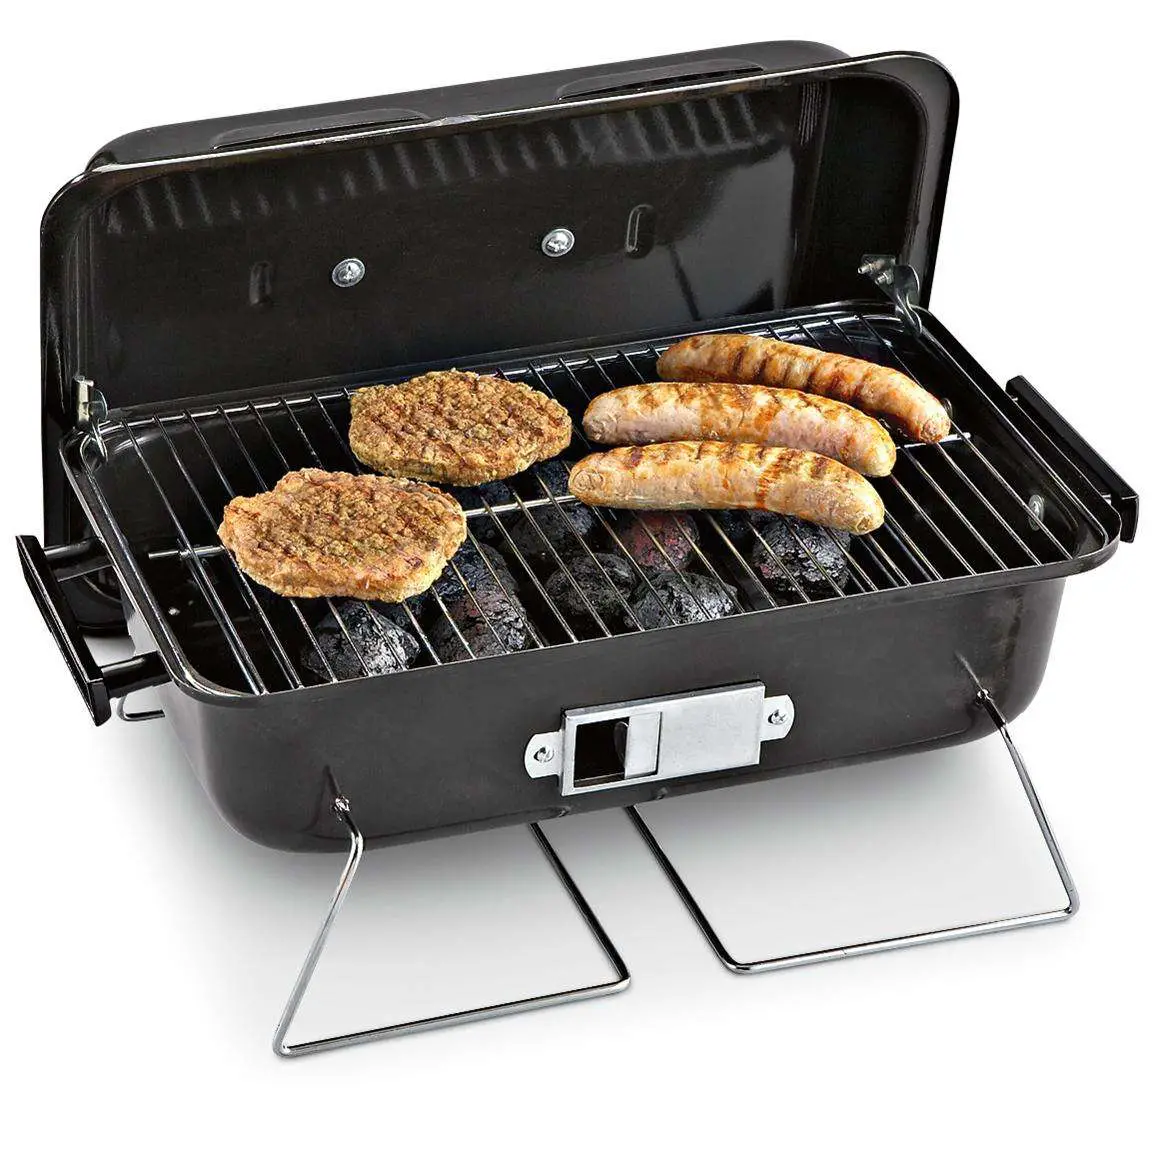 Camp ChefÂ® Portable Charcoal Grill